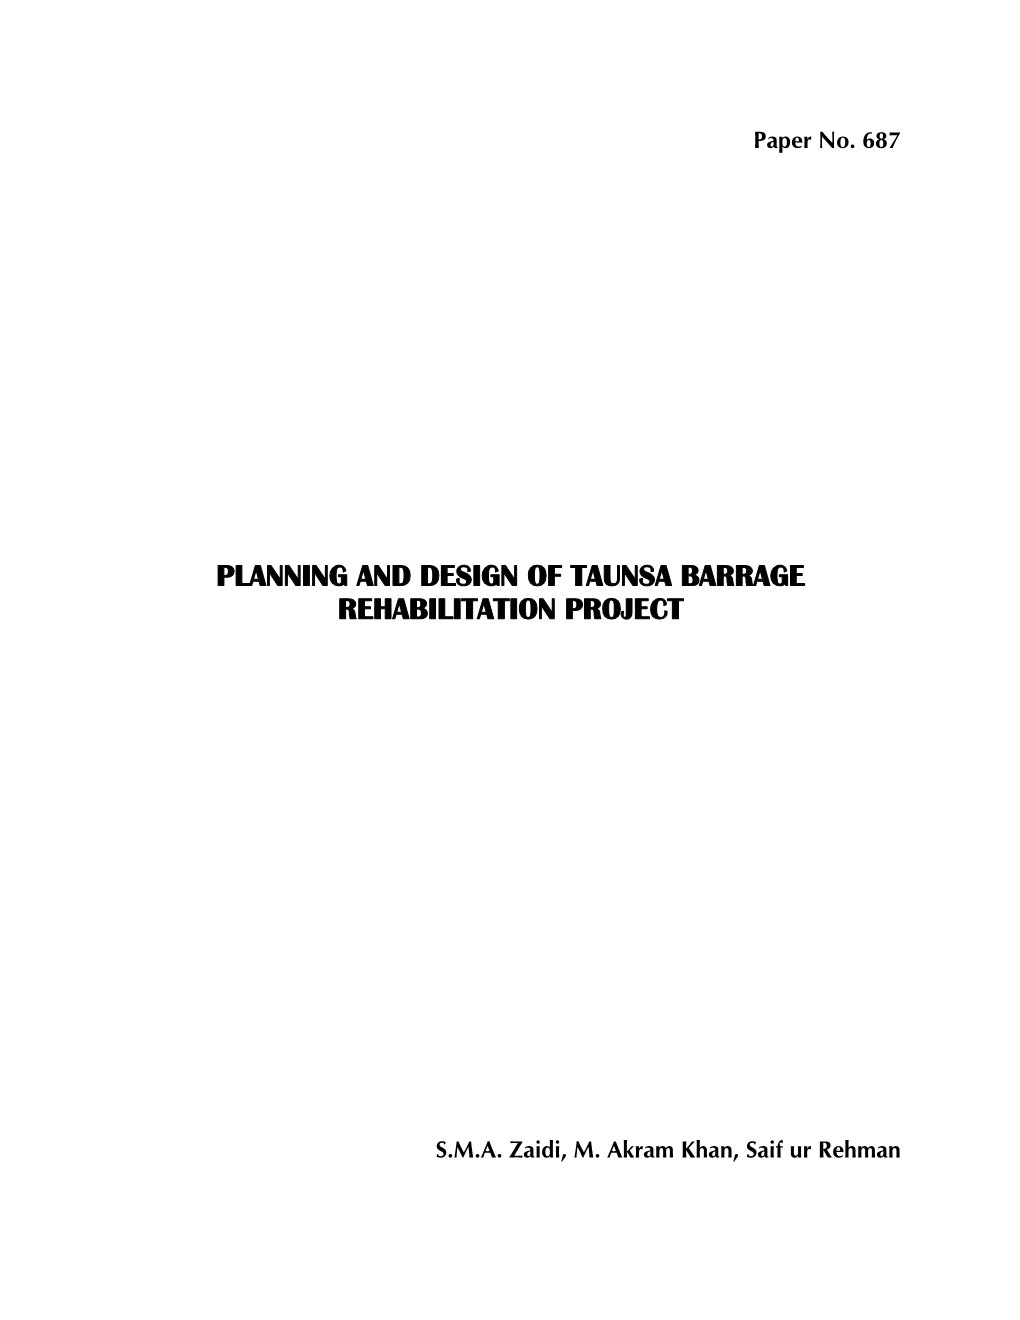 Planning and Design of Taunsa Barrage Rehabilitation Project